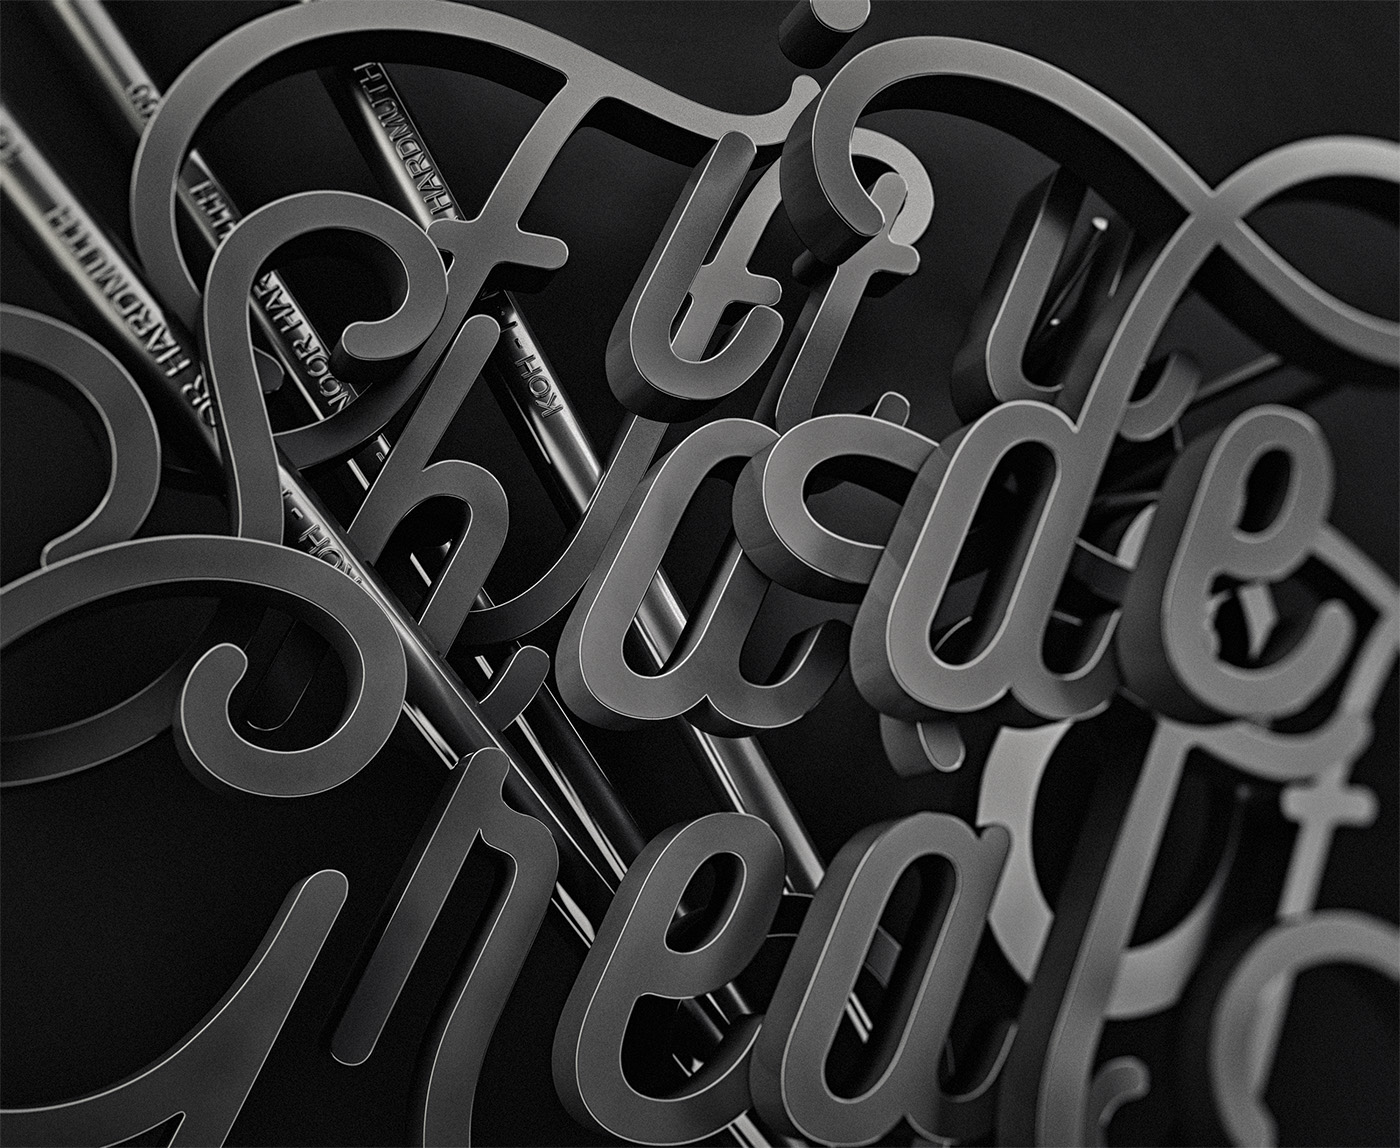 type typography   red 3D Script communication inspiration